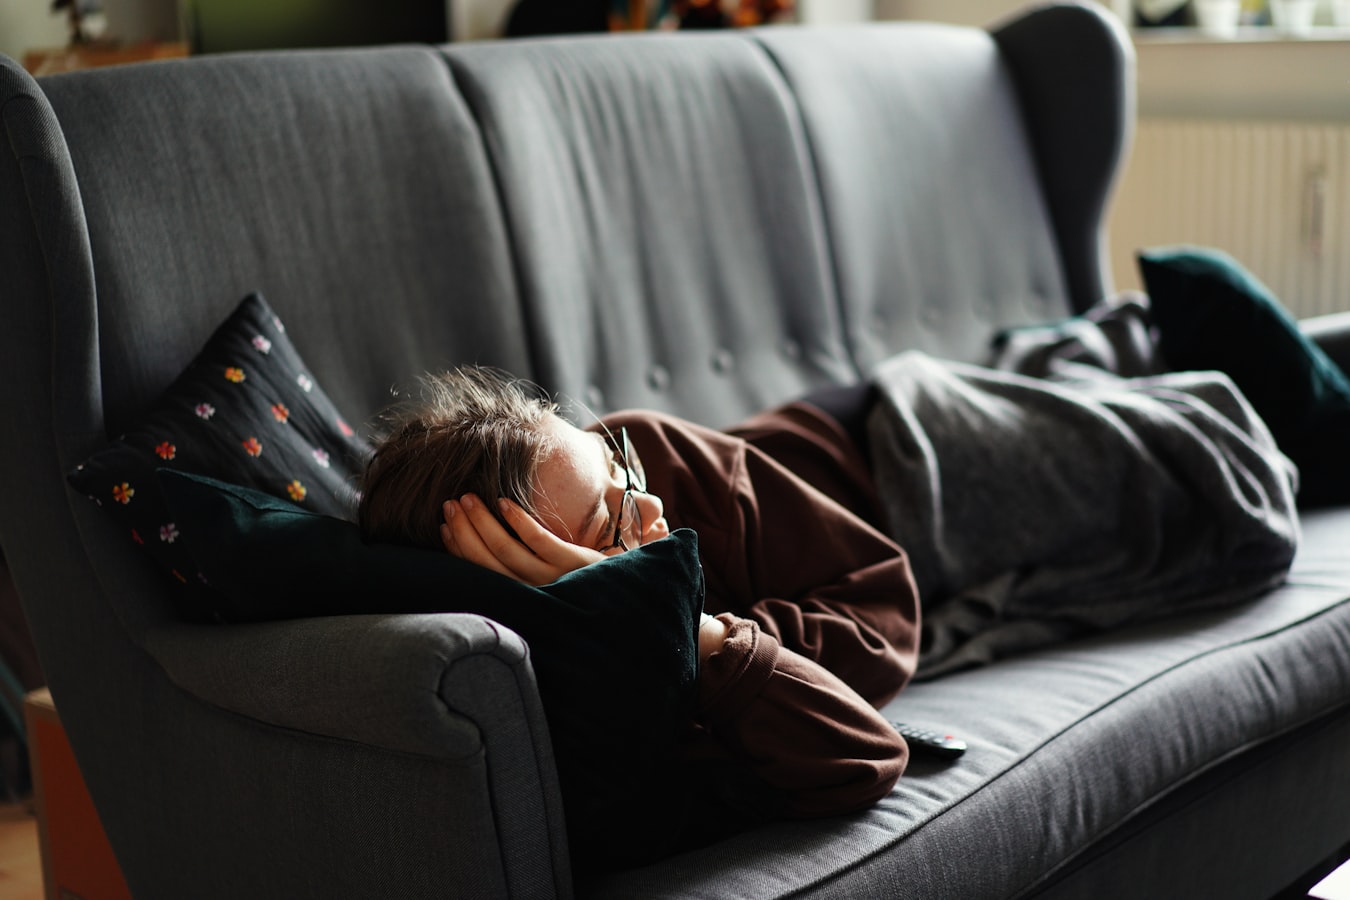 A person relaxing or asleep on a sofa